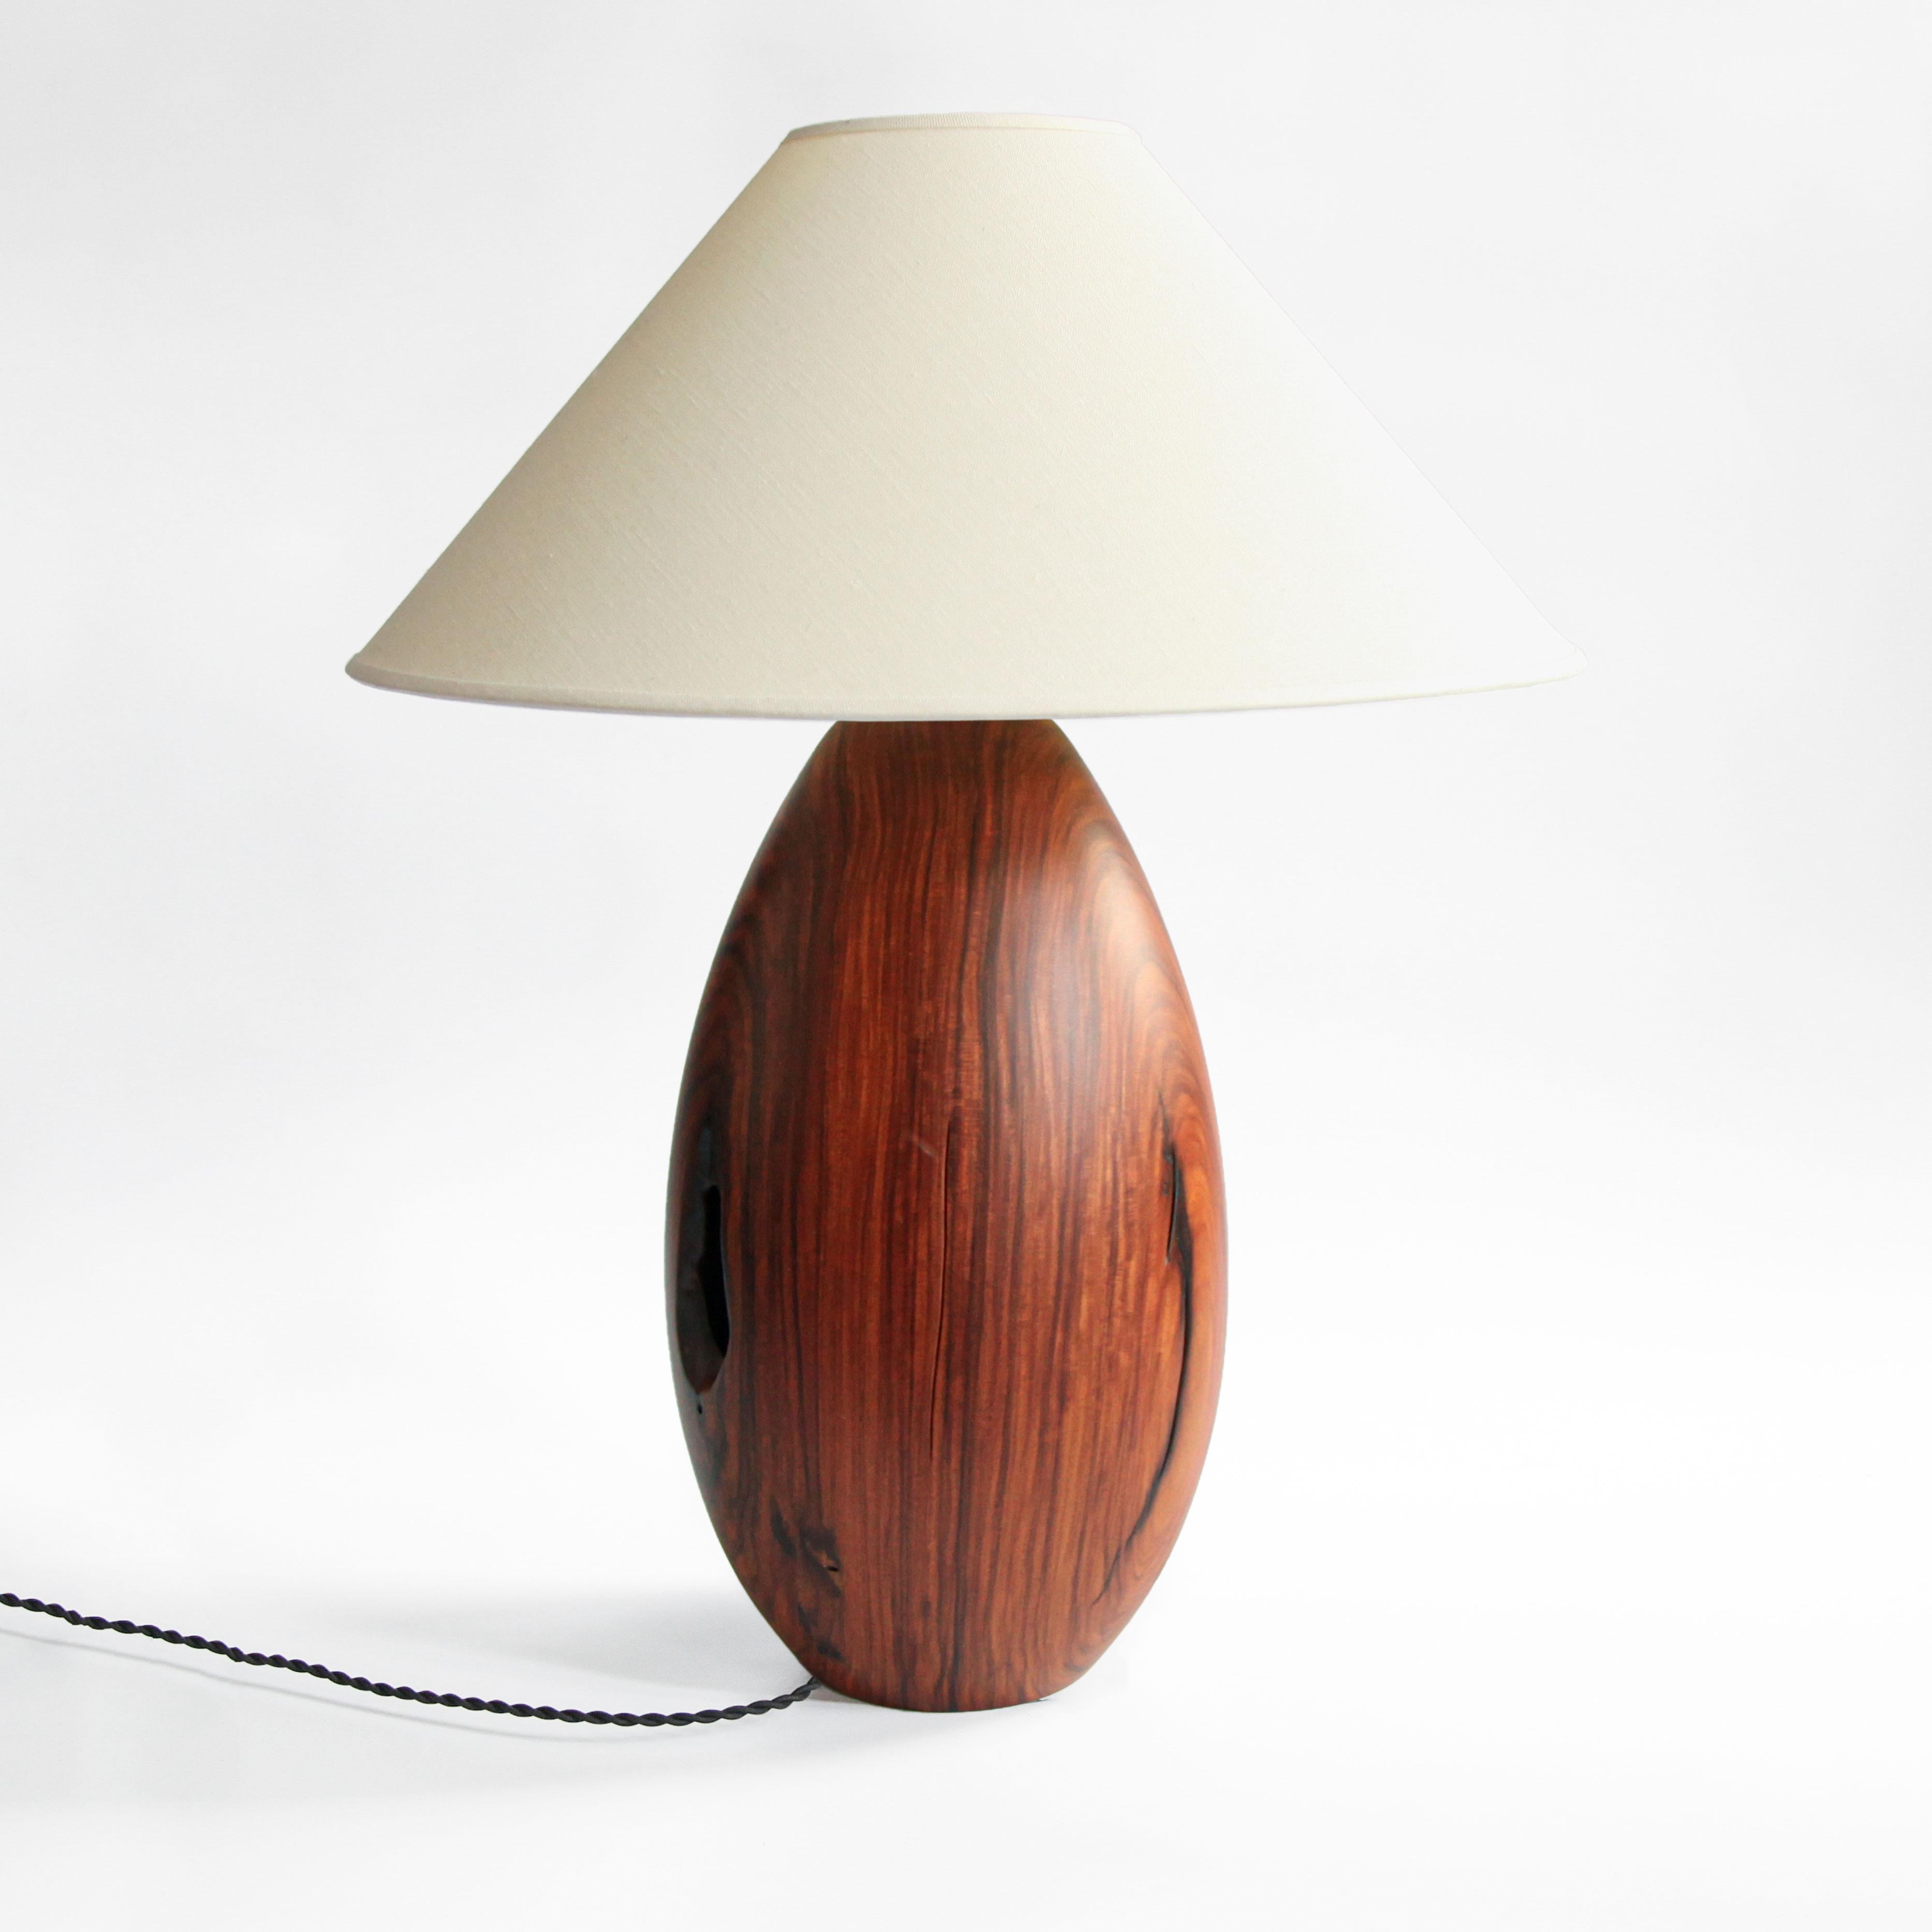 Modern Bolivian Rosewood Lamp with White Linen Shade, Extra Large, Árbol Collection, 38